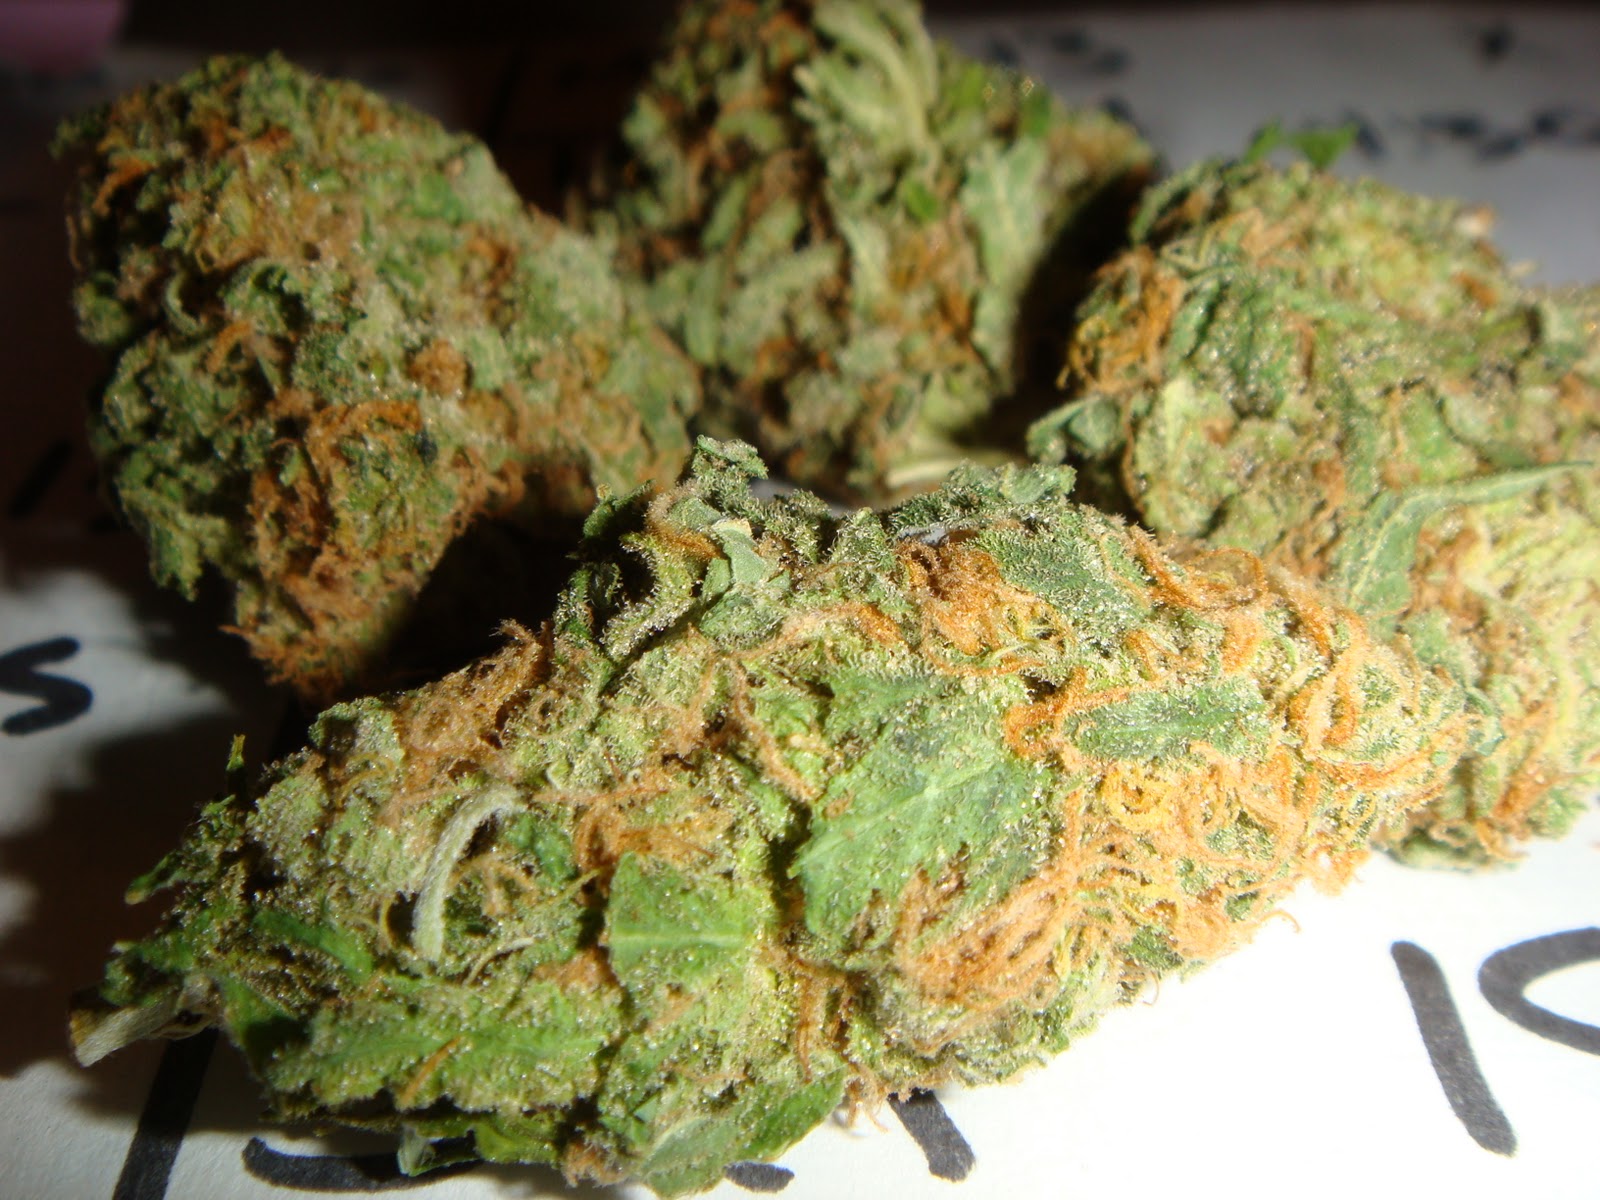 Want To Buy Marijuana Products? – Buy It From Online Dispensary